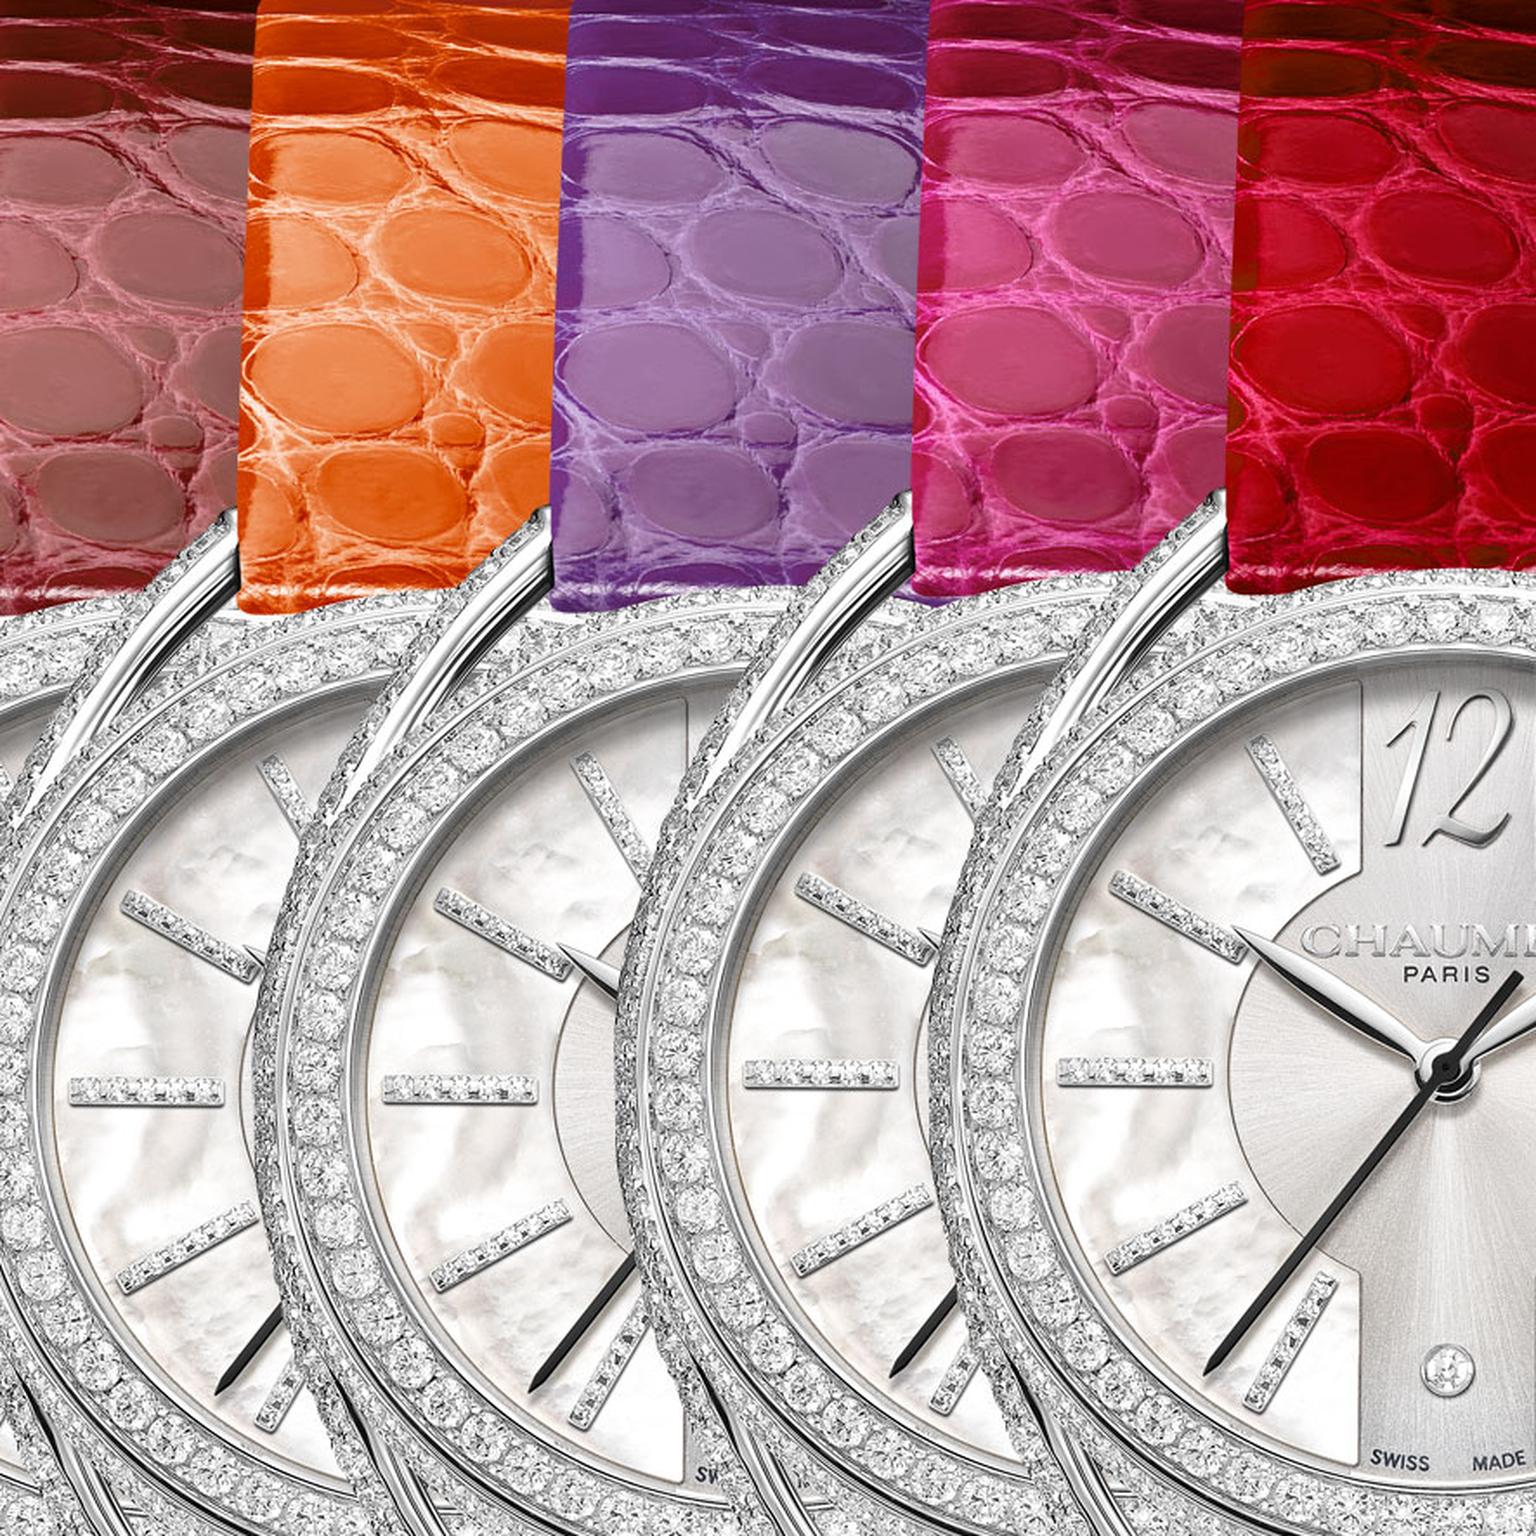 Chaumet Liens Lumiere watches with different coloured straps